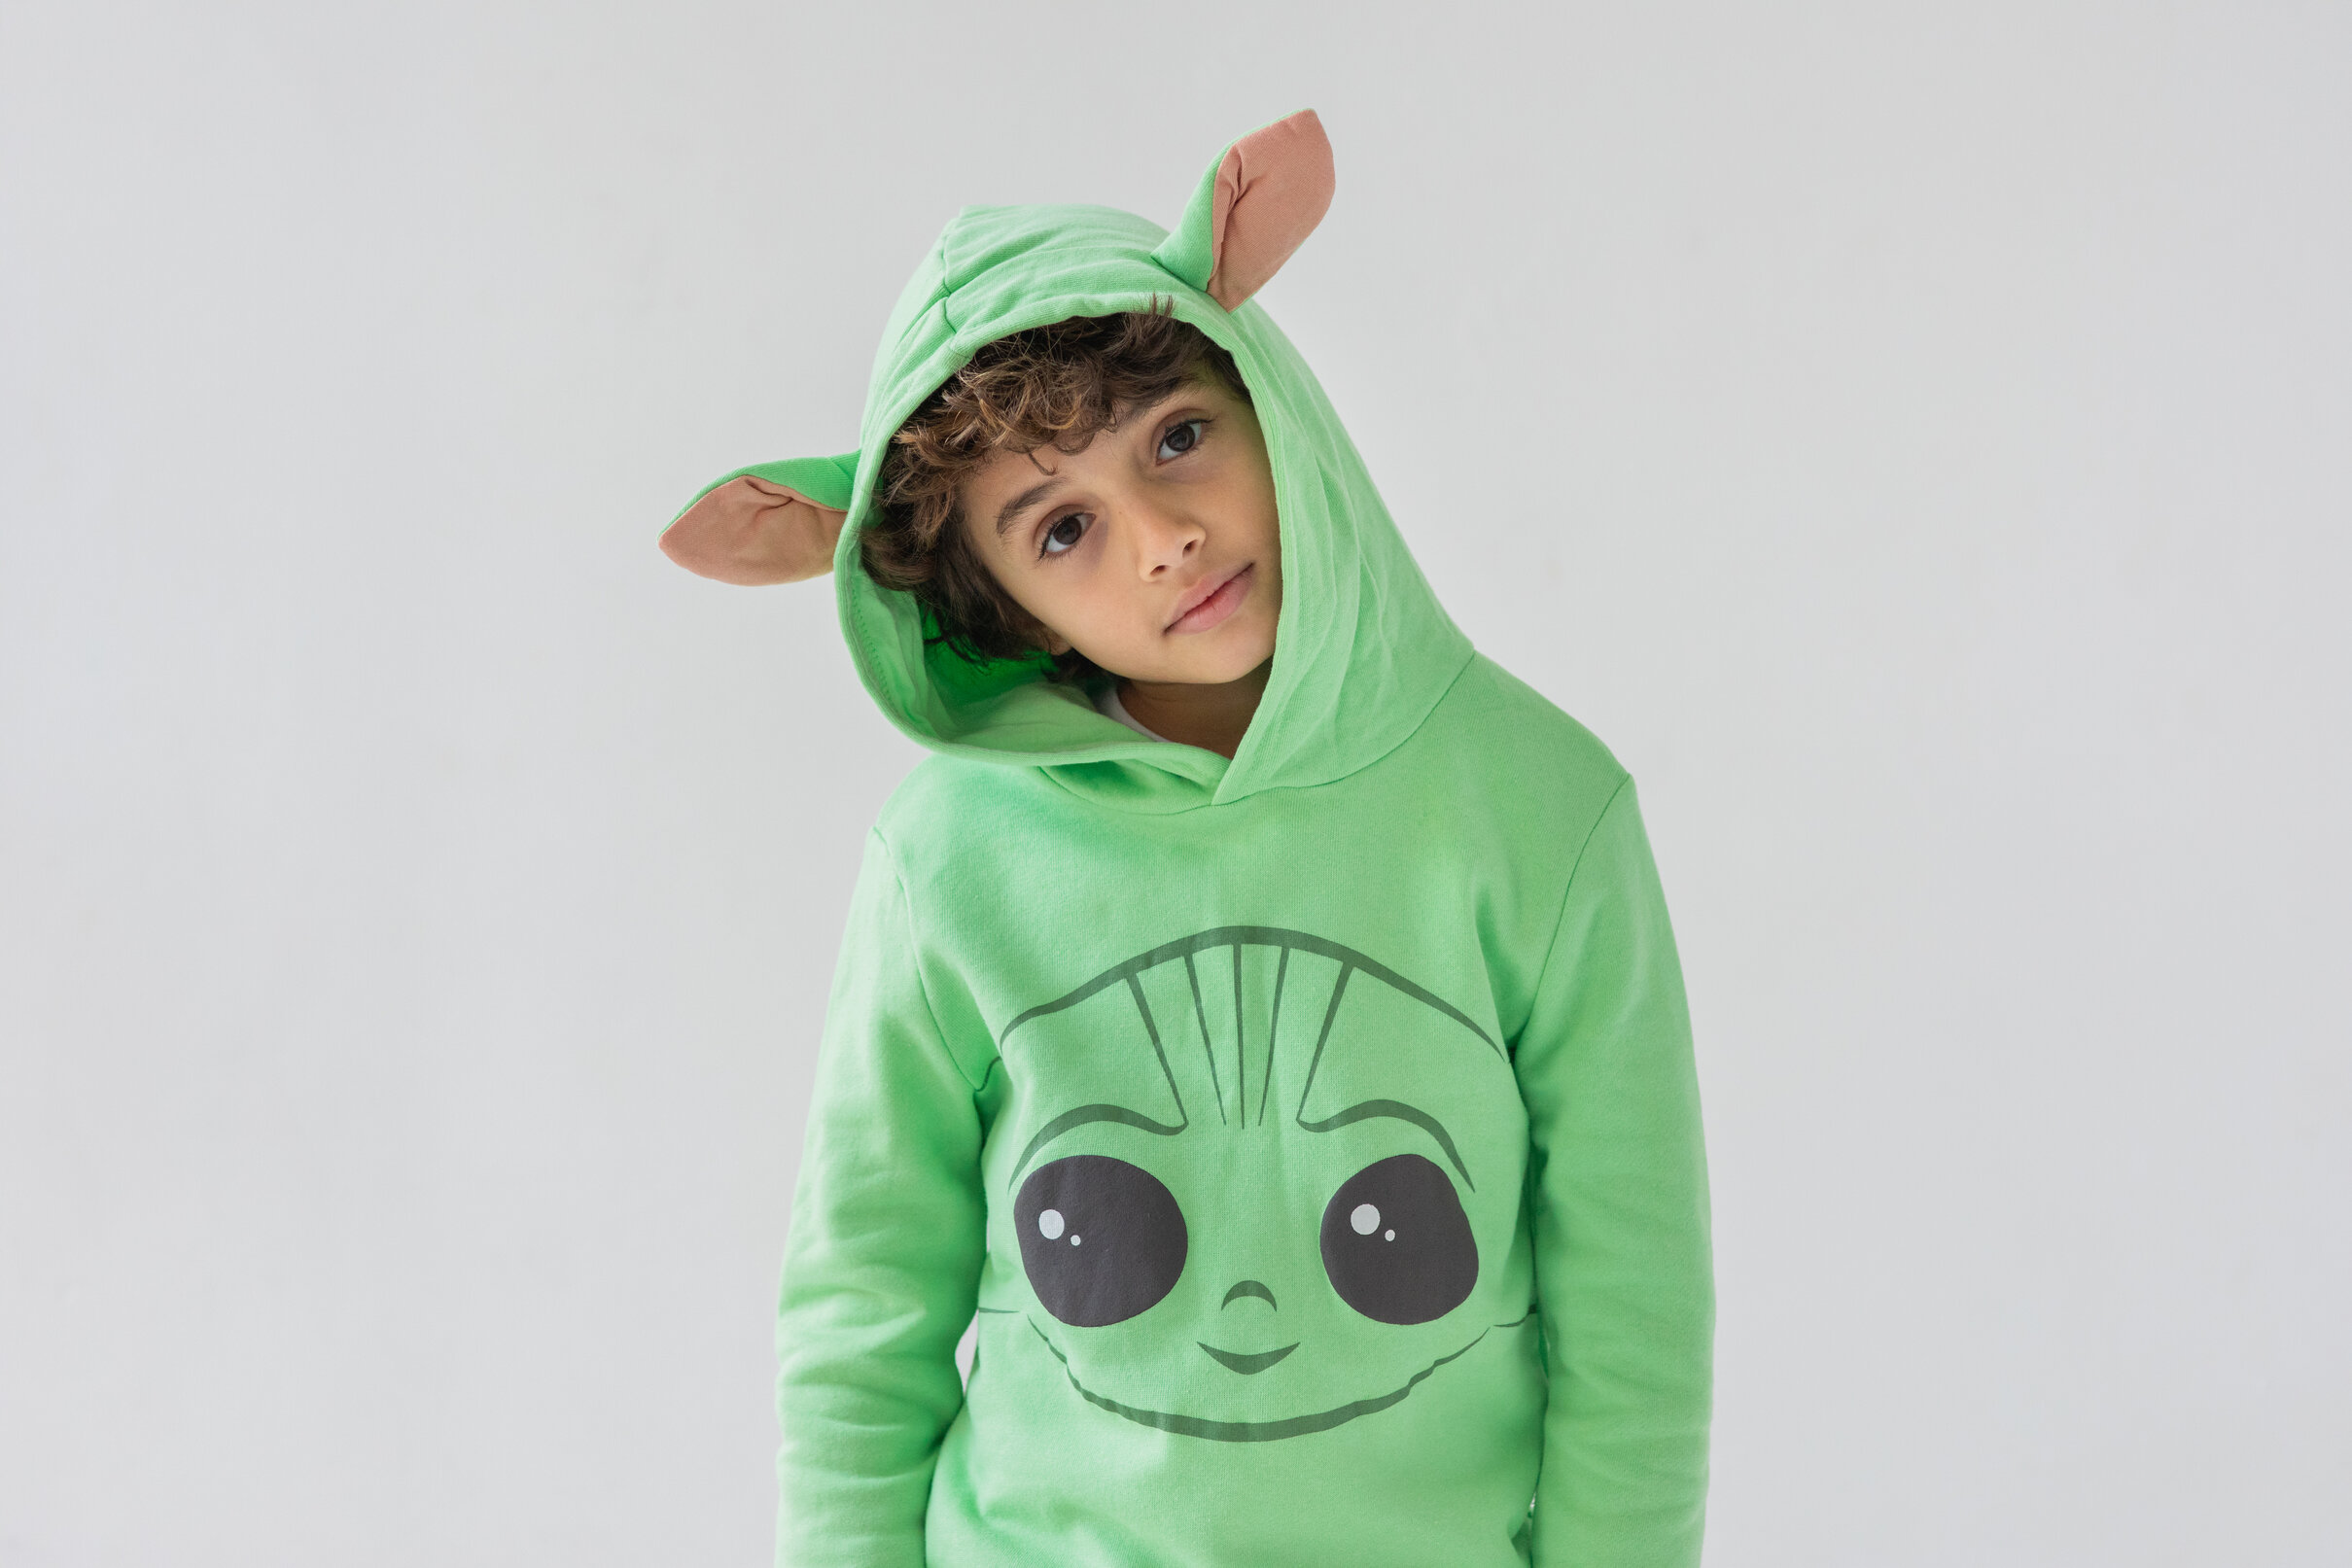 Star Wars Baby Yoda The Mandalorian Boy's Pullover Fleece Hoodie Fancy-Dress Costume for Toddler, 4T - image 4 of 5